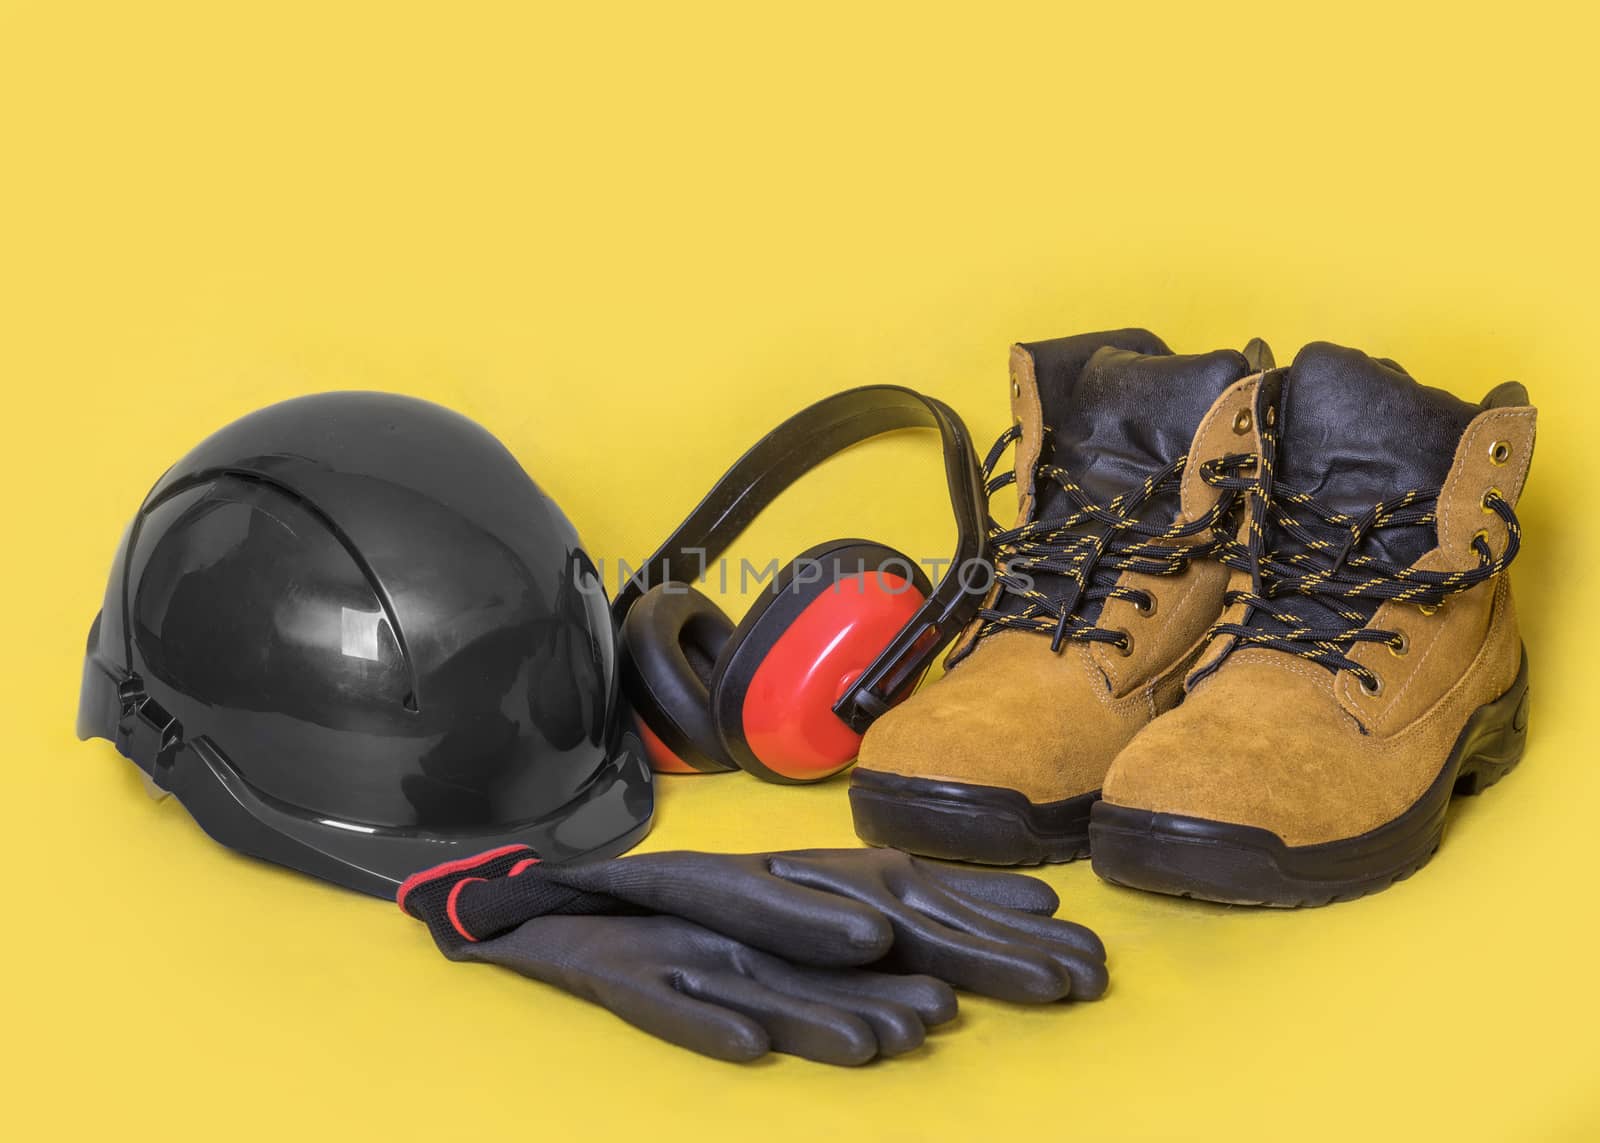 Construction Personal protective equipment on yellow background by Iryna_Melnyk